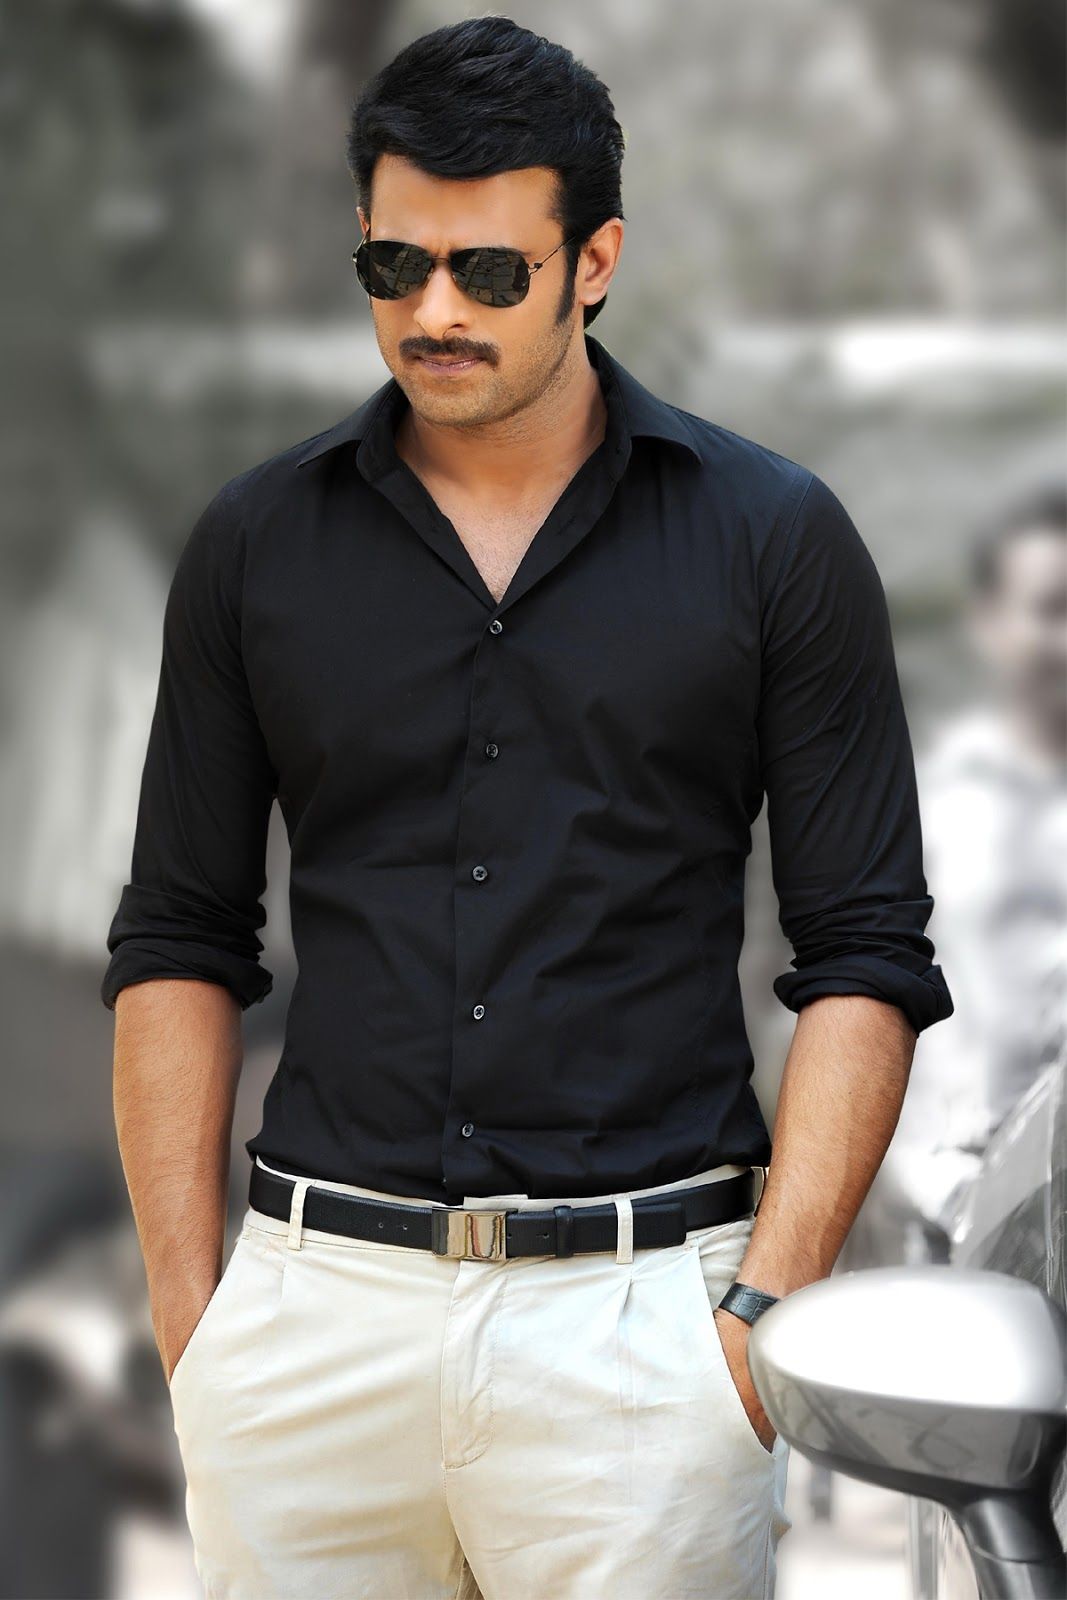 Prabhas Latest HD Wallpapers | HD Wallpapers (High Definition ...